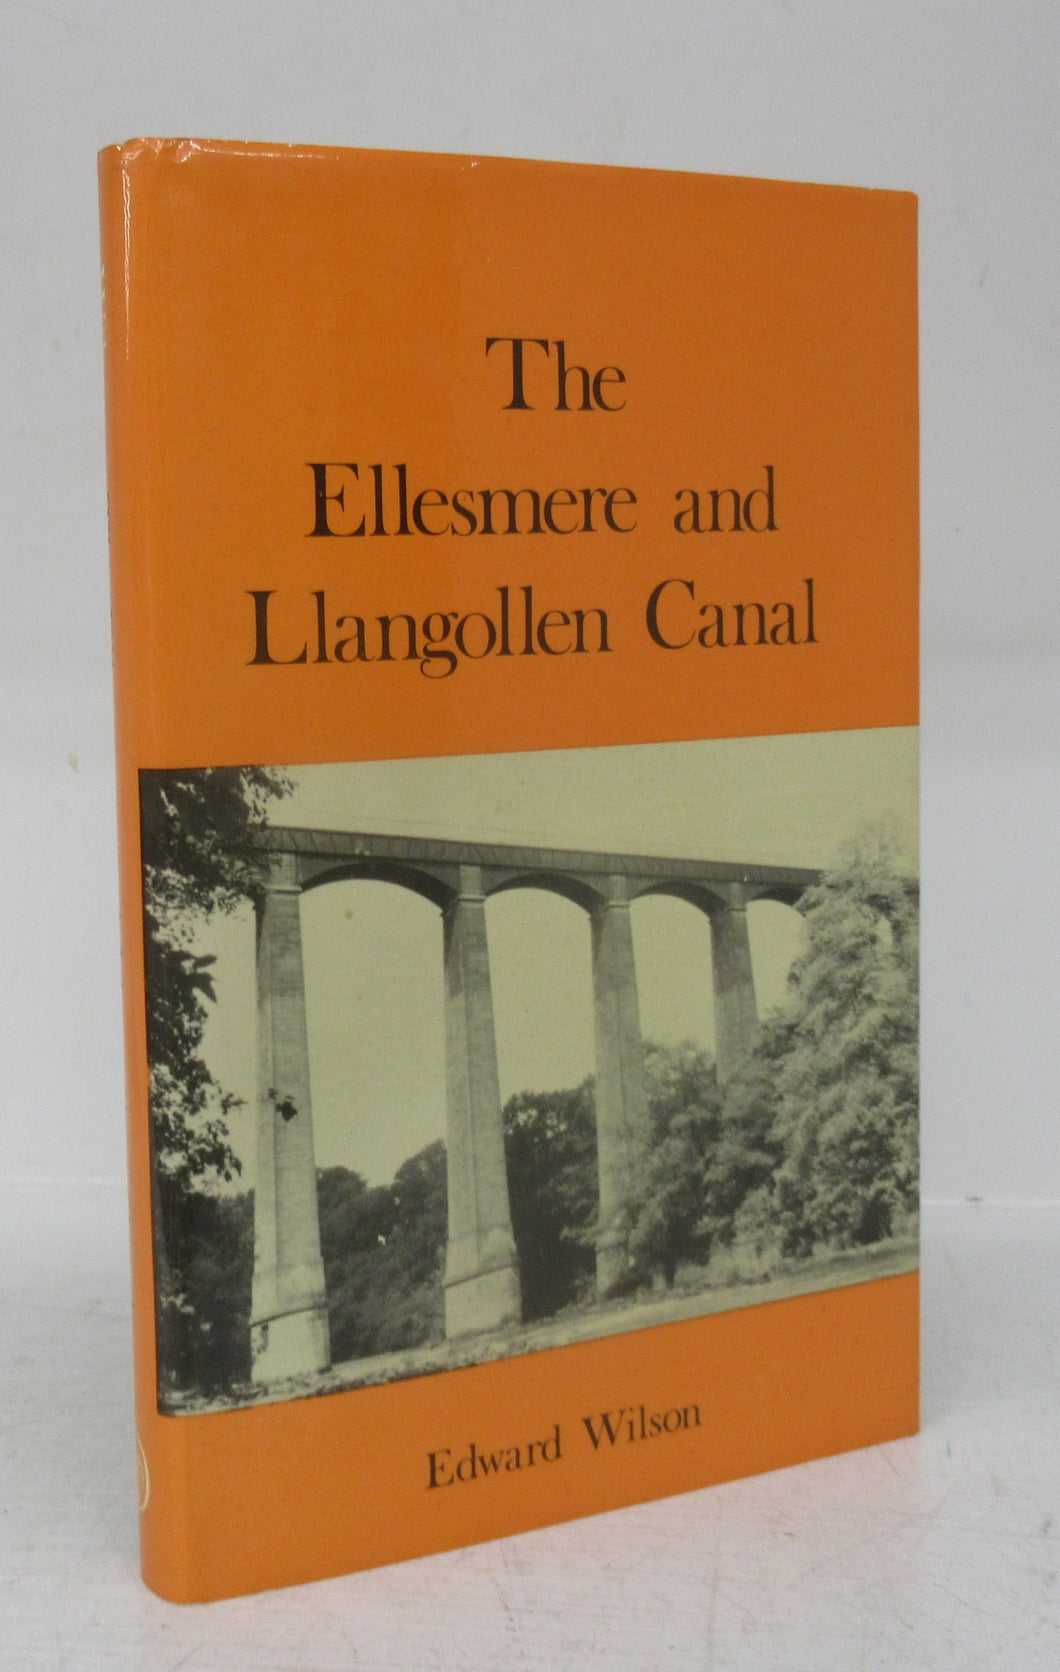 The Ellesmere and Llangollen Canal: An Historical Background